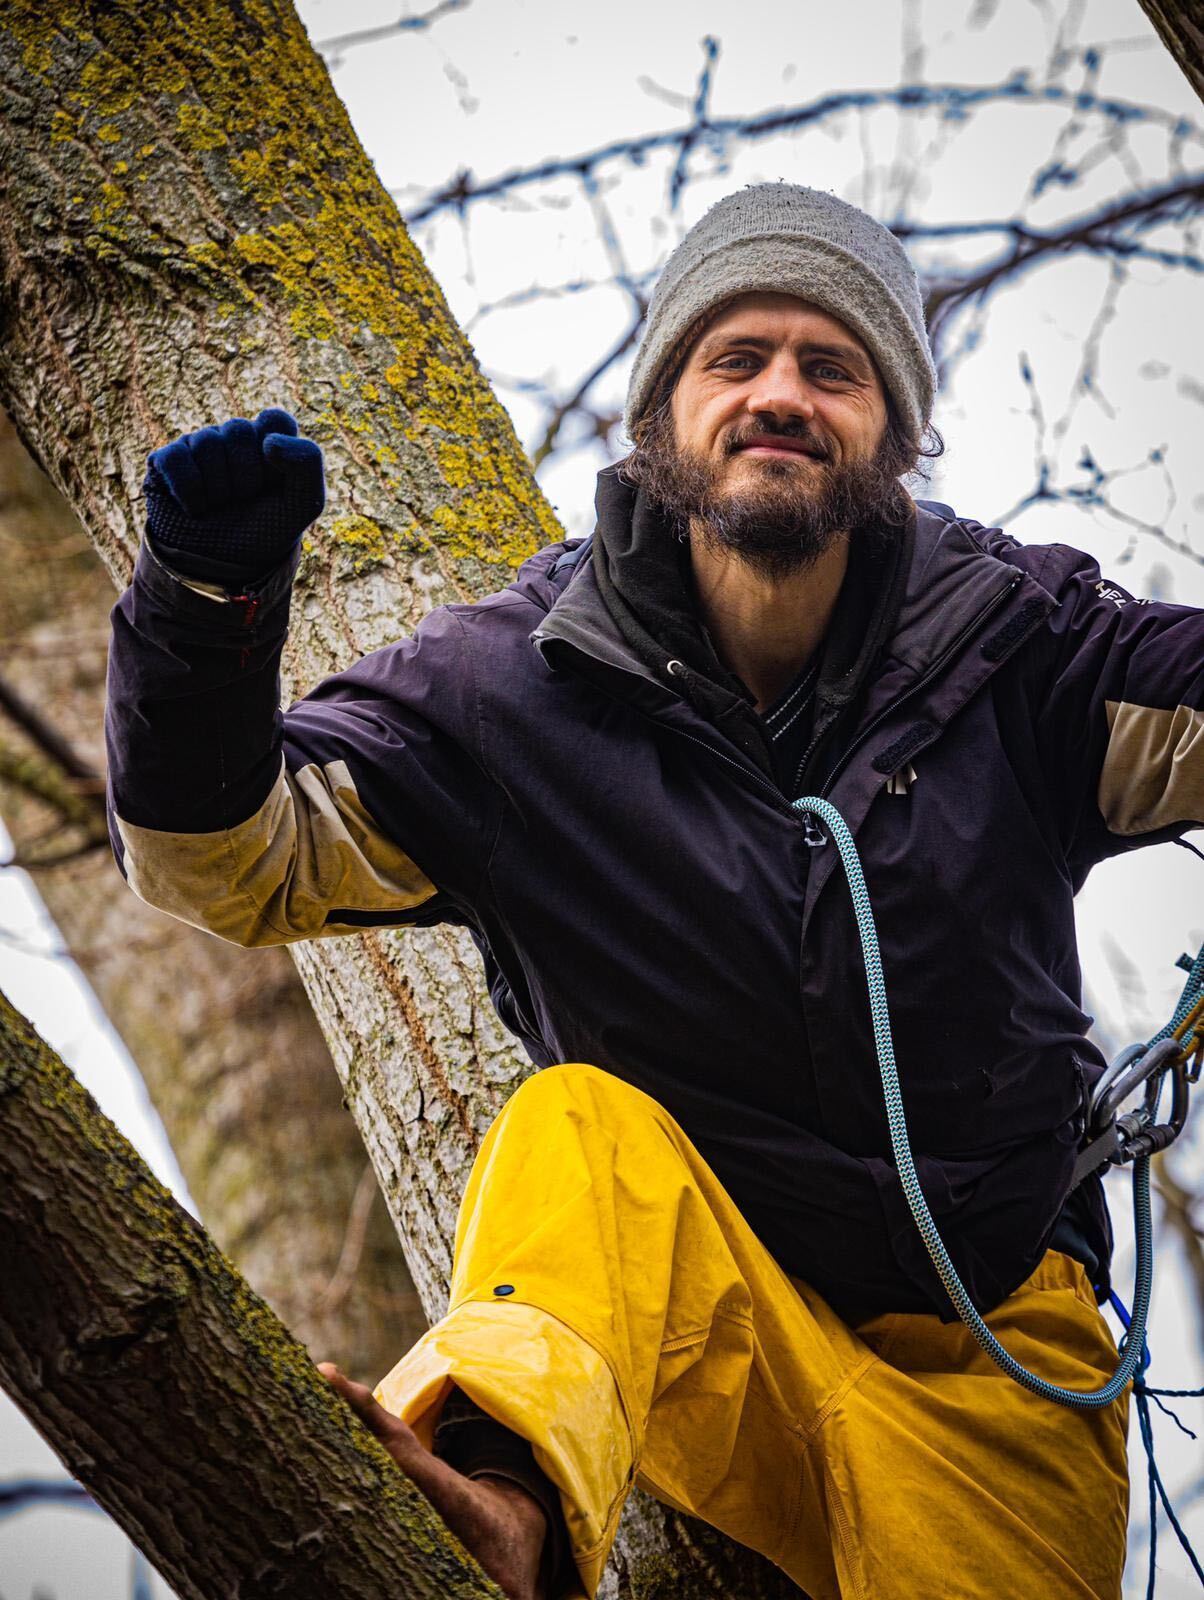 Tree protector Marcus Carambola, 32, in the tree in York Gardens, Battersea. Credit: Anthony Jarman.